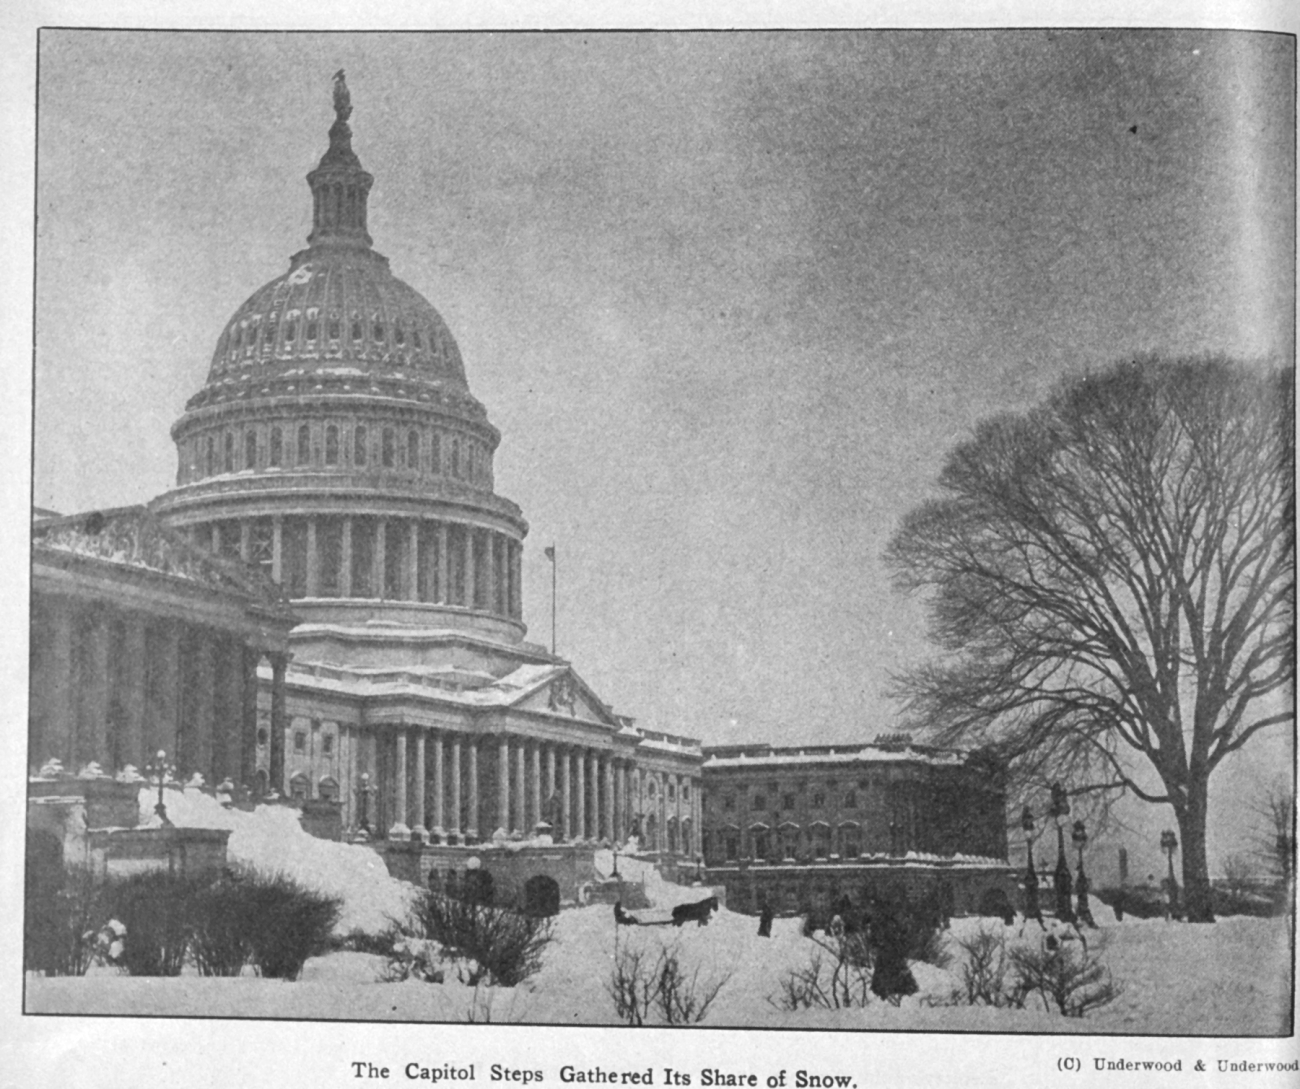 The Capitol steps gathered its share of snow during the Knickerbocker storm